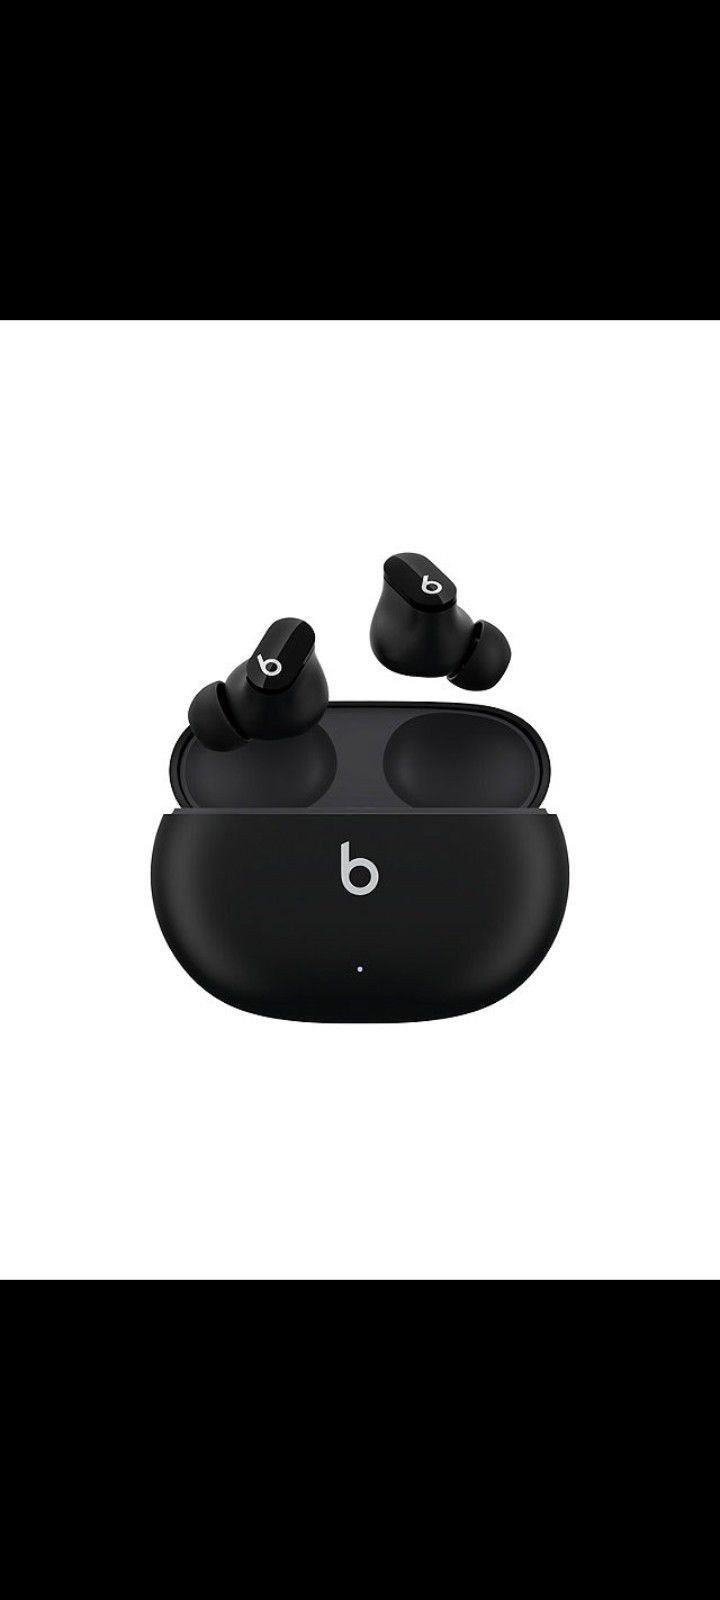 Beats Studio Buds True Wireless Bluetooth In-Ear Headphones with Active Noise Cancelling, Black

